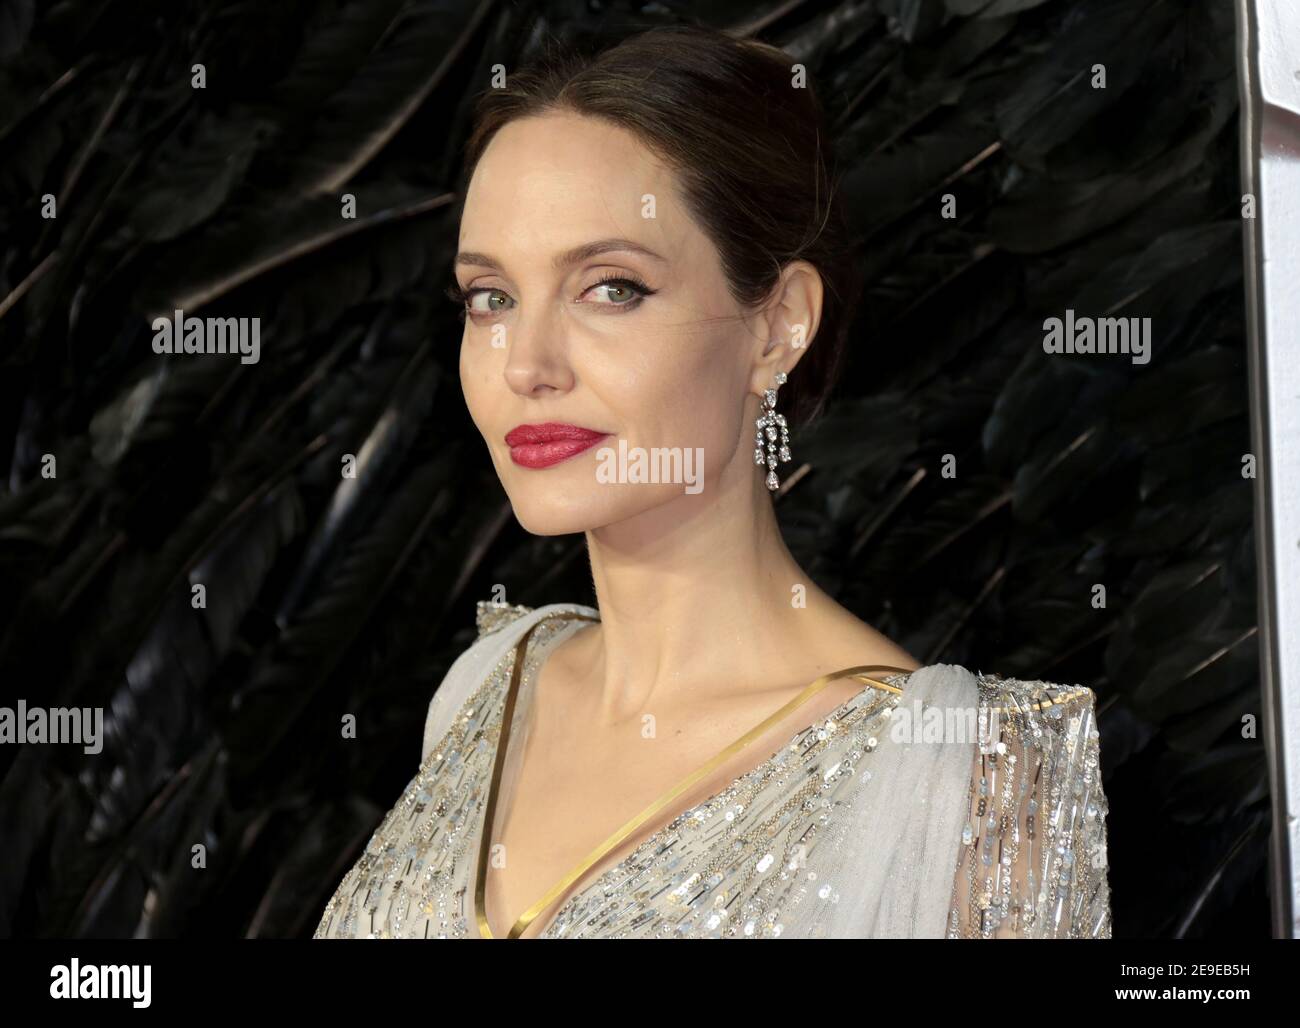 Jolie High Stock and Images - Alamy